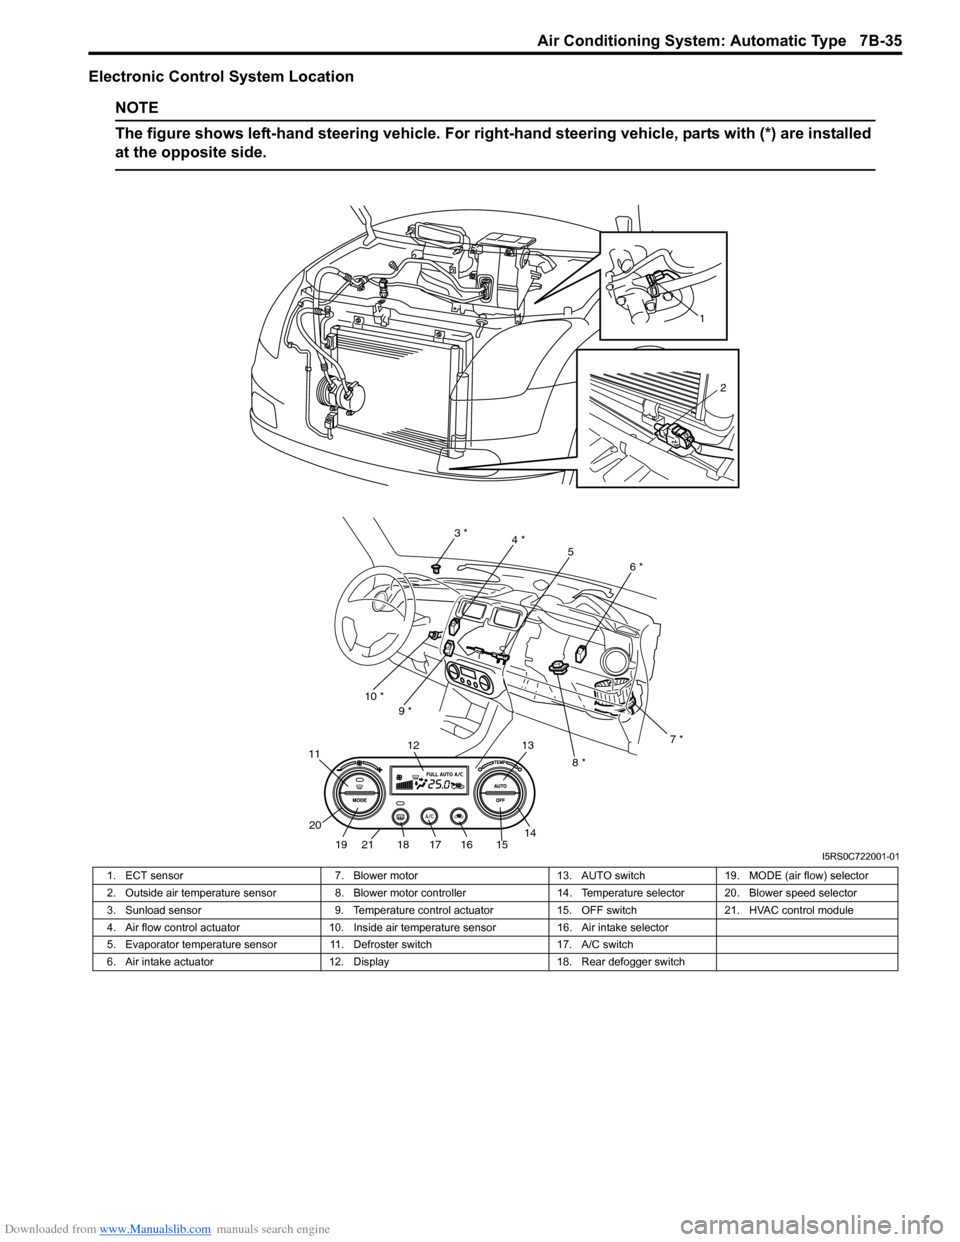 SUZUKI SWIFT 2005 2.G Service Owners Guide Downloaded from www.Manualslib.com manuals search engine Air Conditioning System: Automatic Type 7B-35
Electronic Control System Location
NOTE
The figure shows left-hand steering vehicle. For right-ha